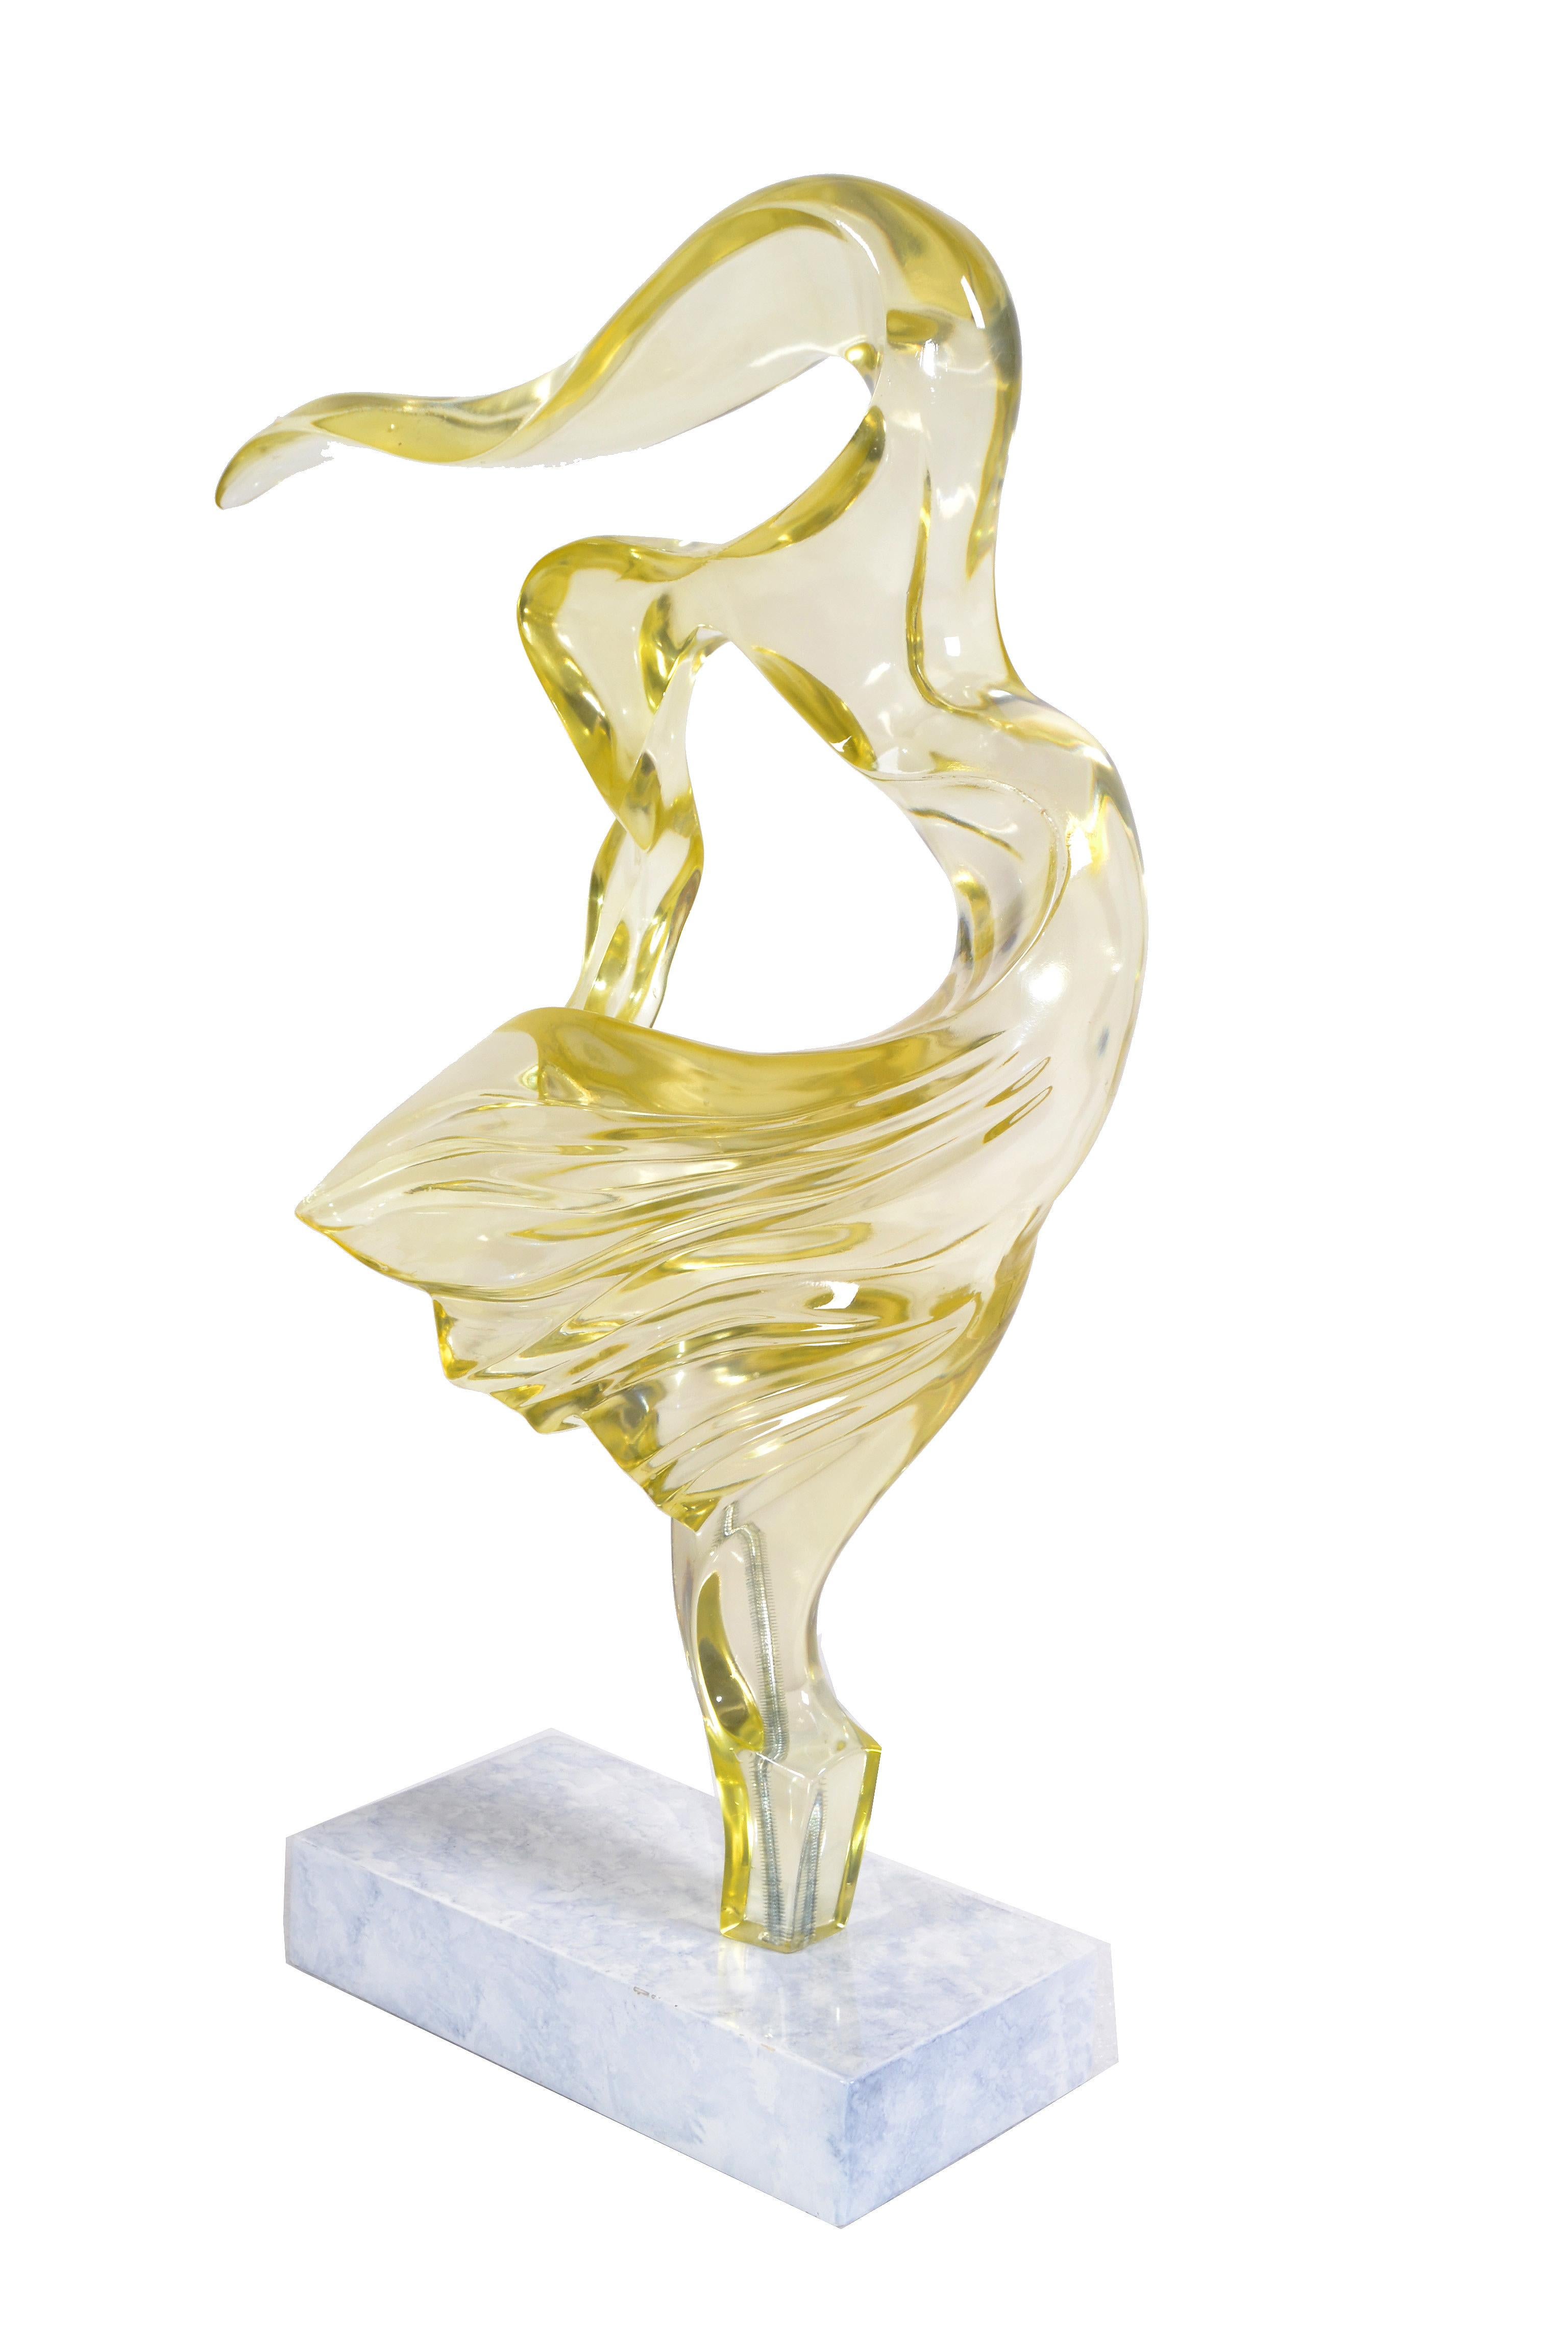 Tall Neon Yellow Mid-Century Modern Abstract Lucite Sculpture on White Base 1980 In Good Condition For Sale In Miami, FL